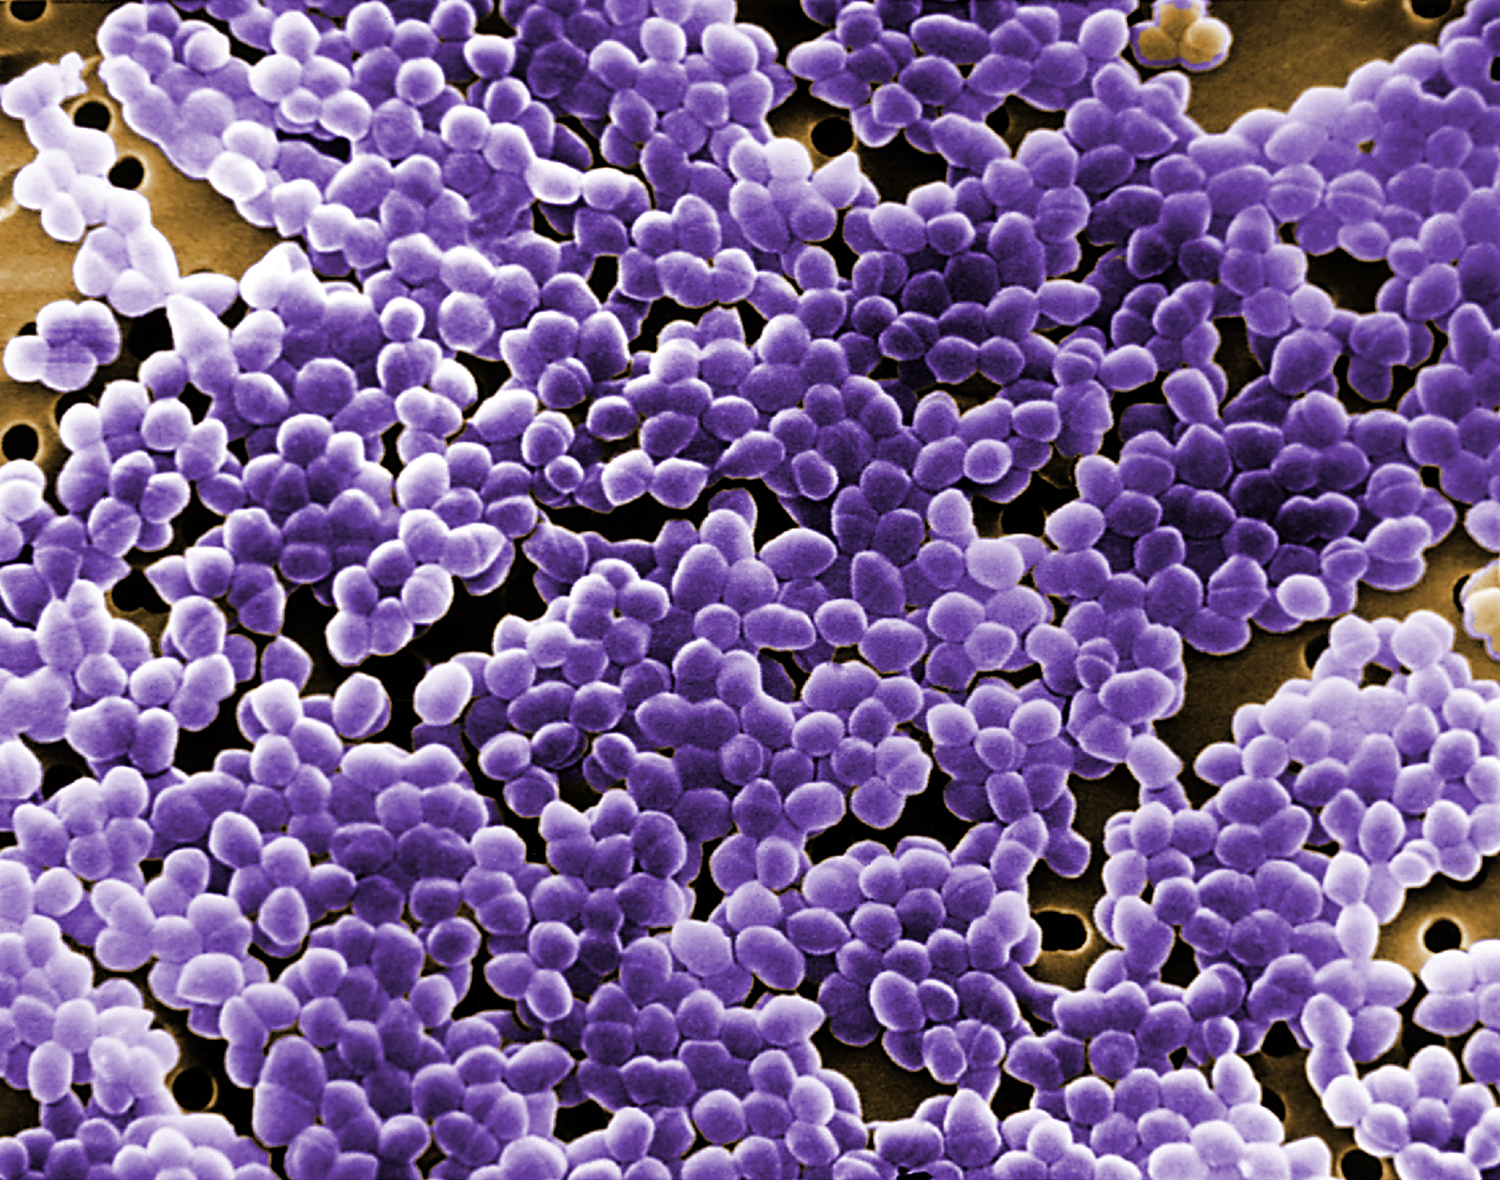 Digitally colorized scanning electron microscopic (SEM) of Enterococcus faecium bacteria. Copyright holder: Janice Haney Carr. Link: https://phil.cdc.gov/Details.aspx?pid=12802.